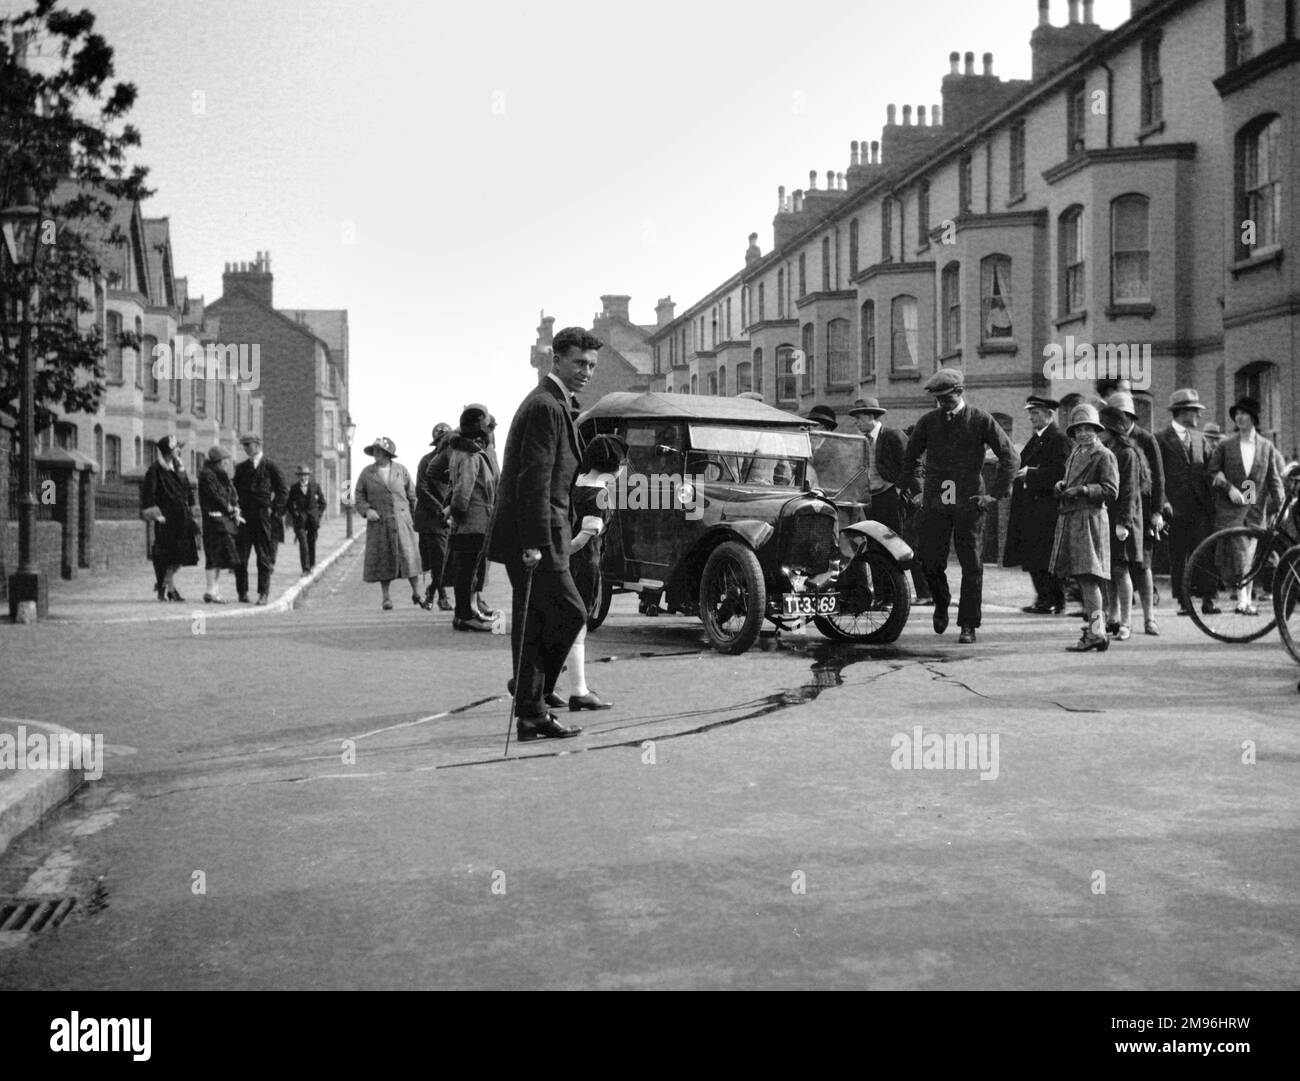 Street scene with people gathered round a damaged car.  Water from the broken radiator appears to be running into the gutter. Stock Photo